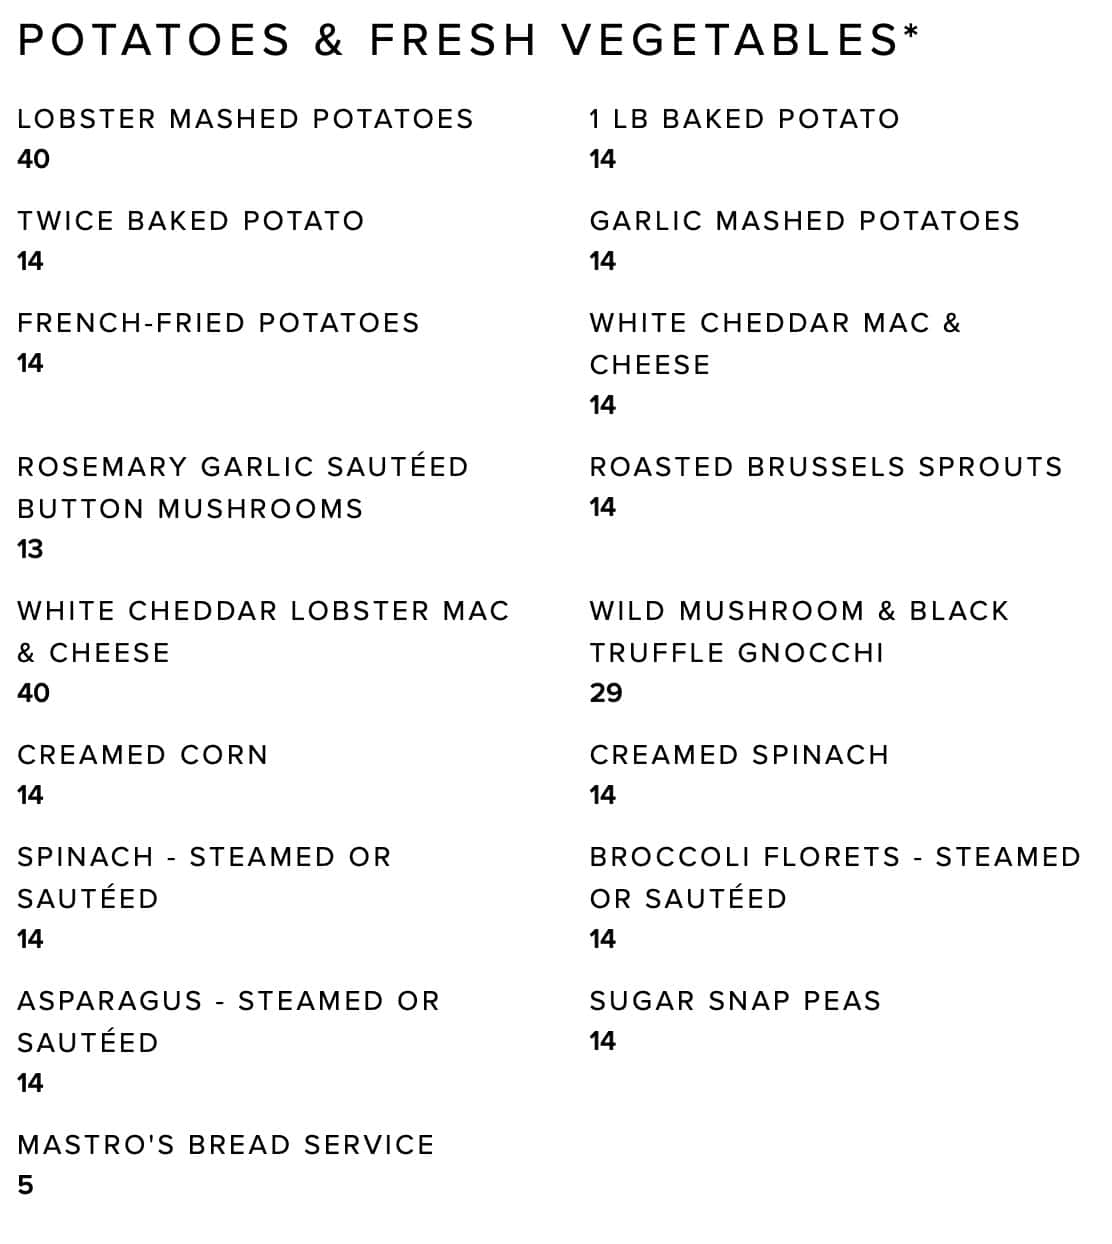 Mastro's Steakhouse Potatoes and Vegetables Menu